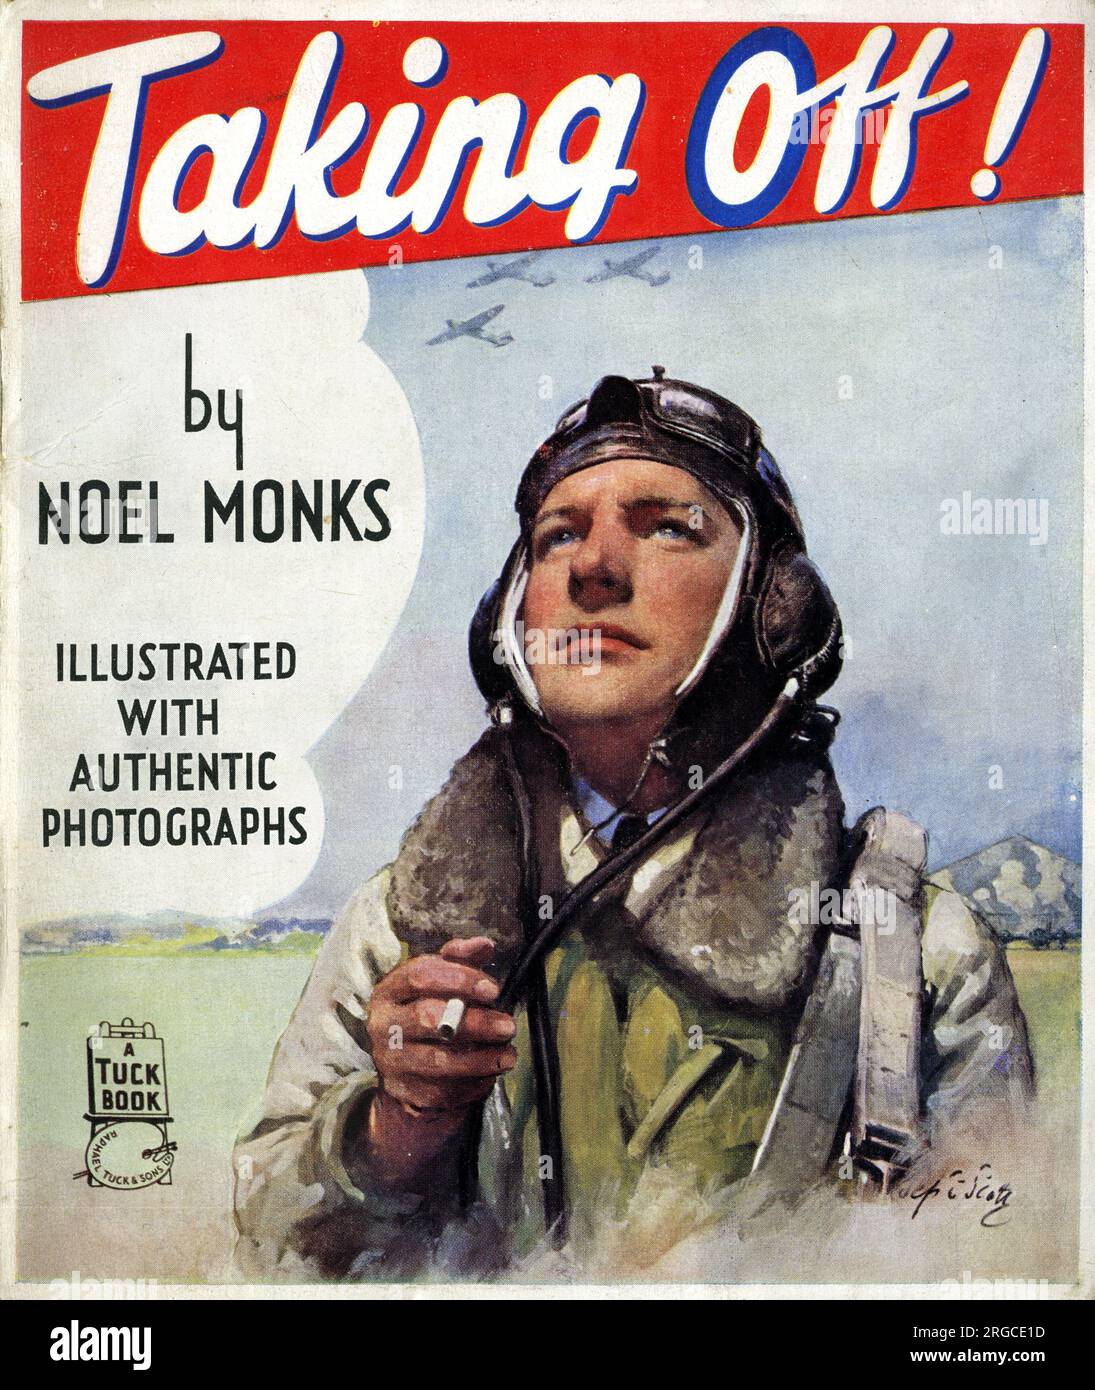 Cover design, Taking Off!  by Noel Monks, showing an RAF pilot looking up at the sky Stock Photo